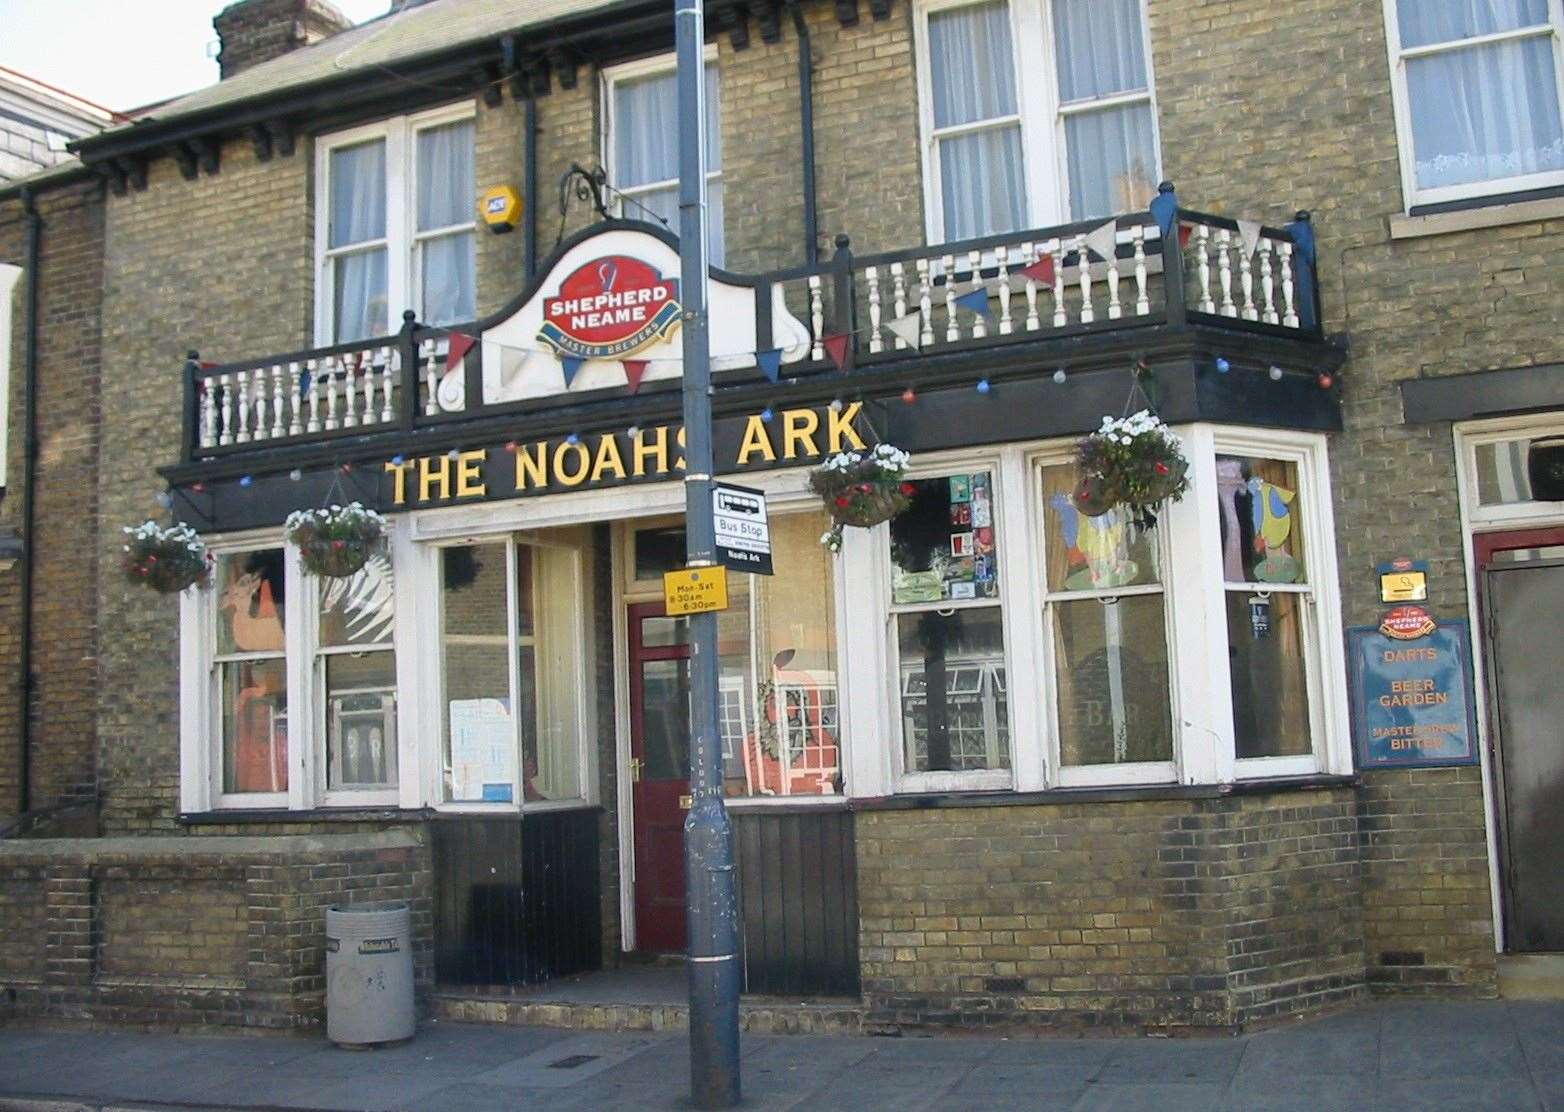 The Noah's Ark, Whitstable closed in August 2002